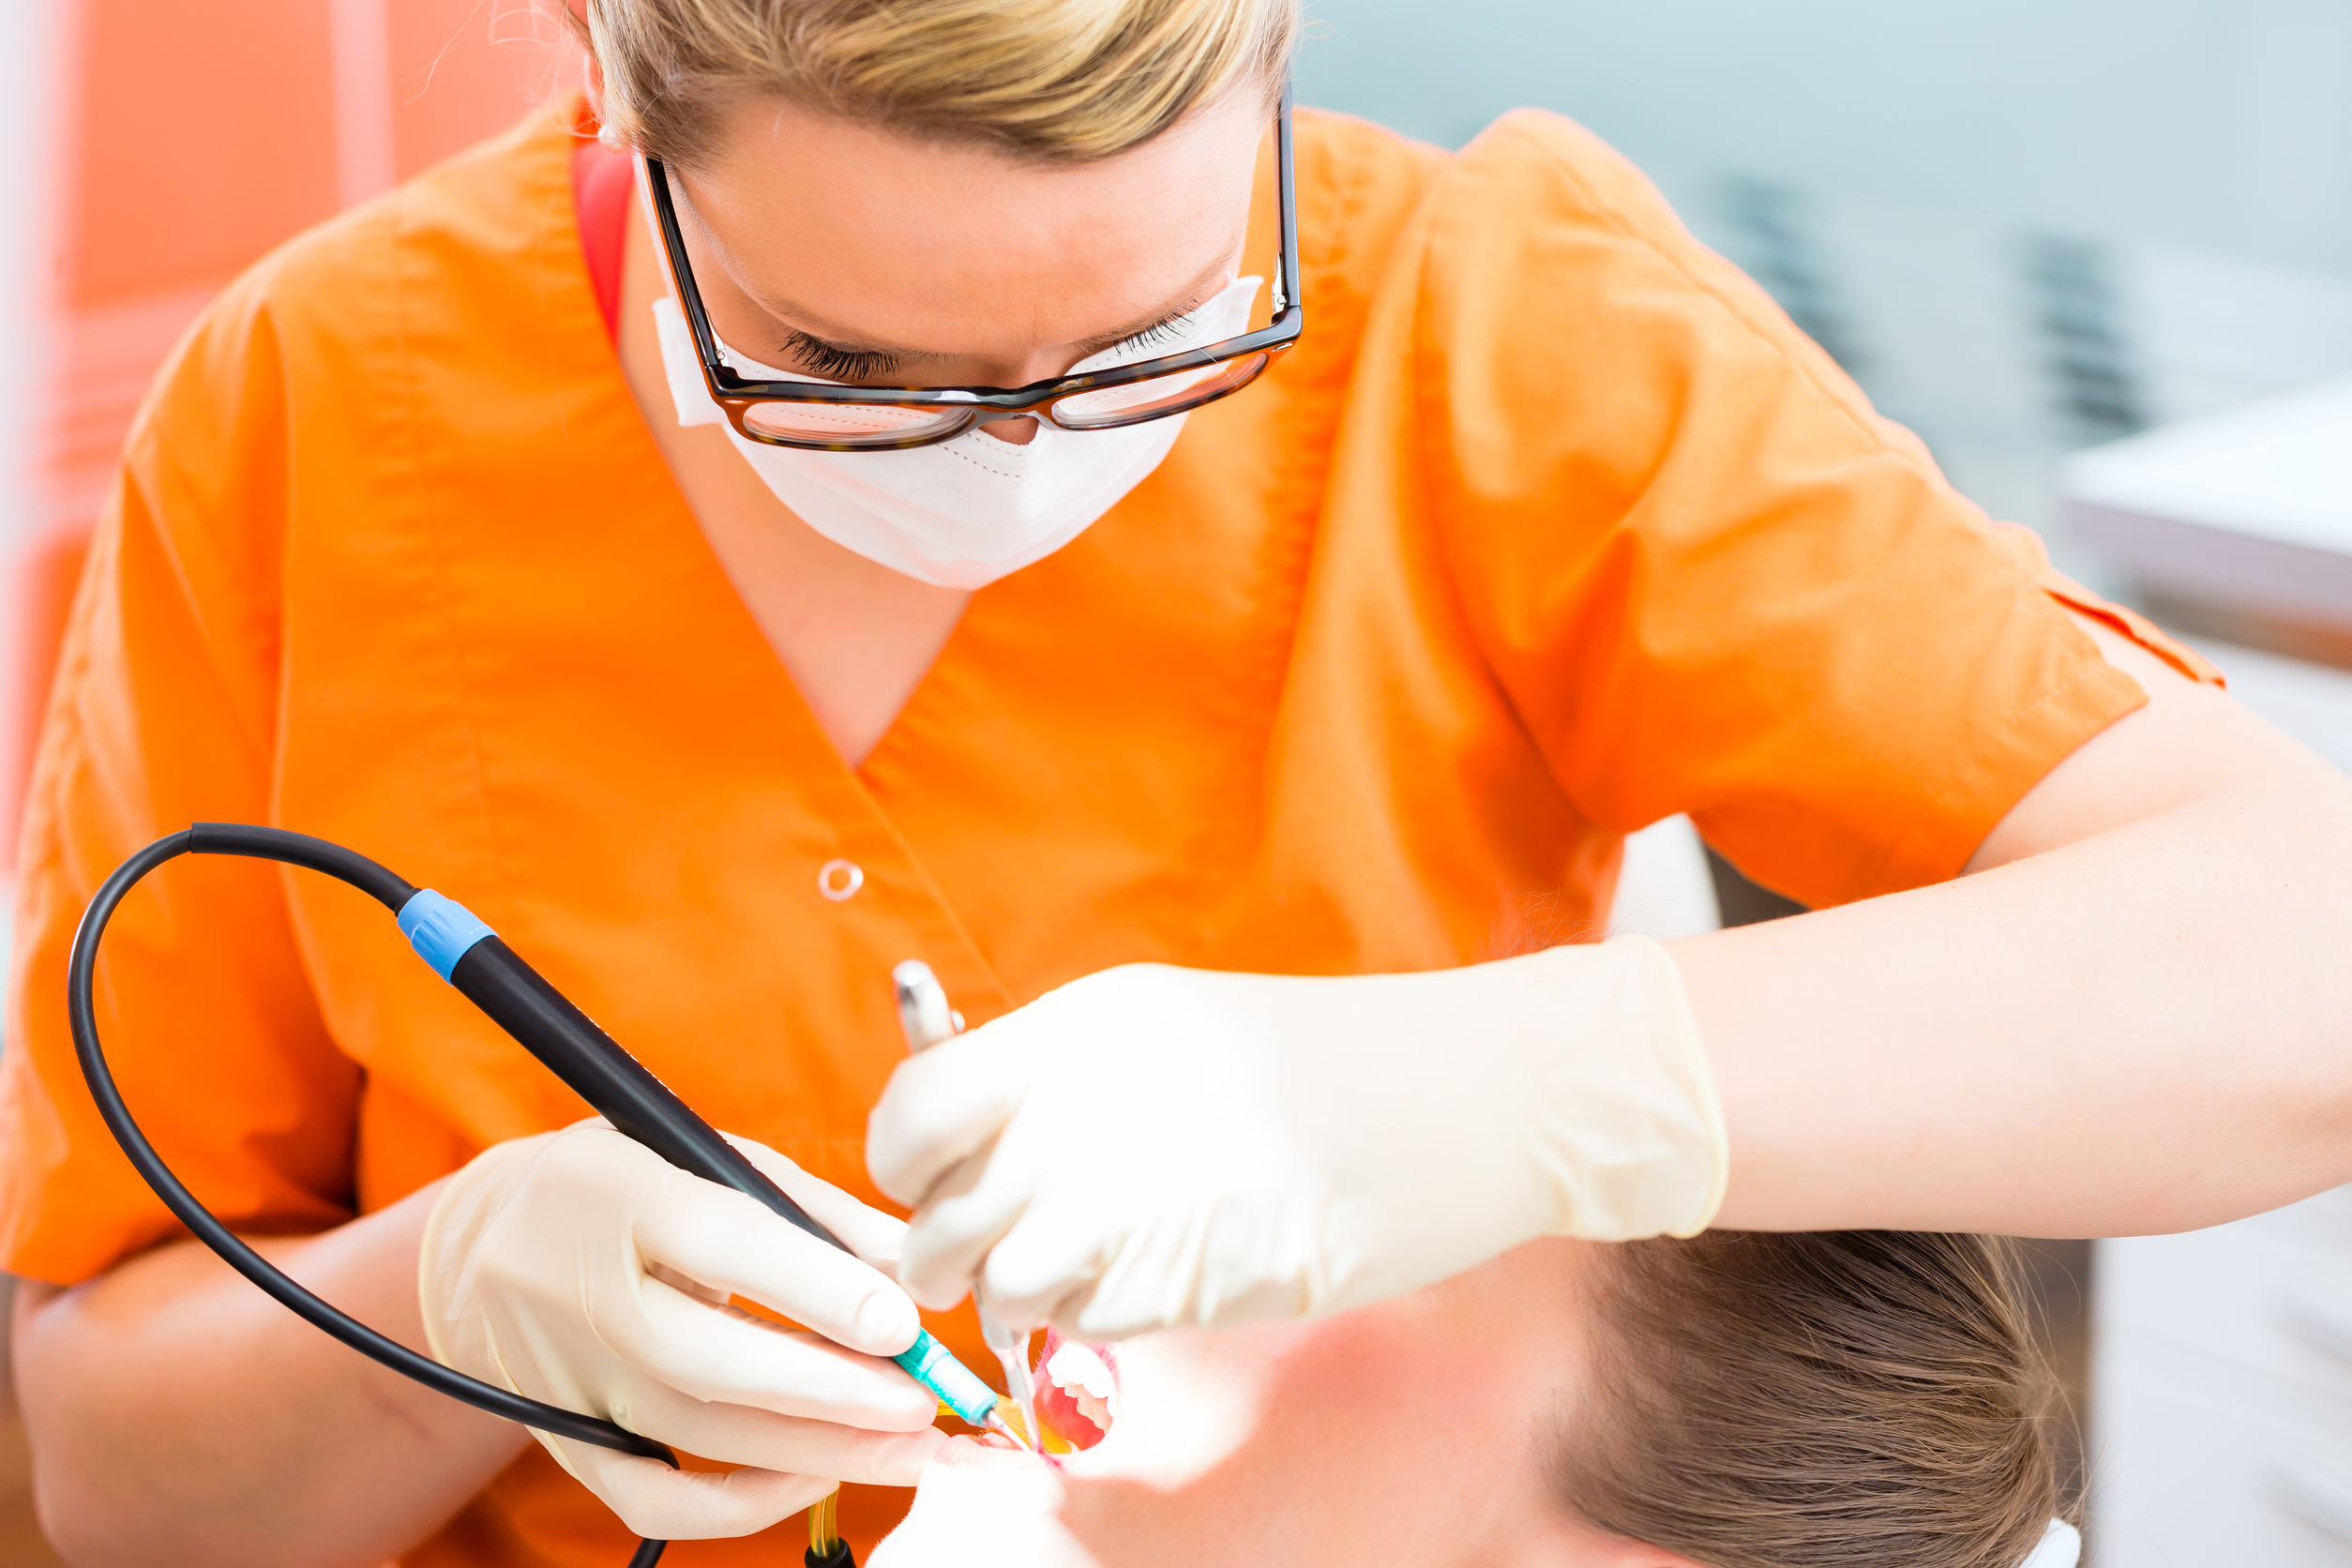 A Good Emergency Dentist in Kennewick Can Be a Life-Saver